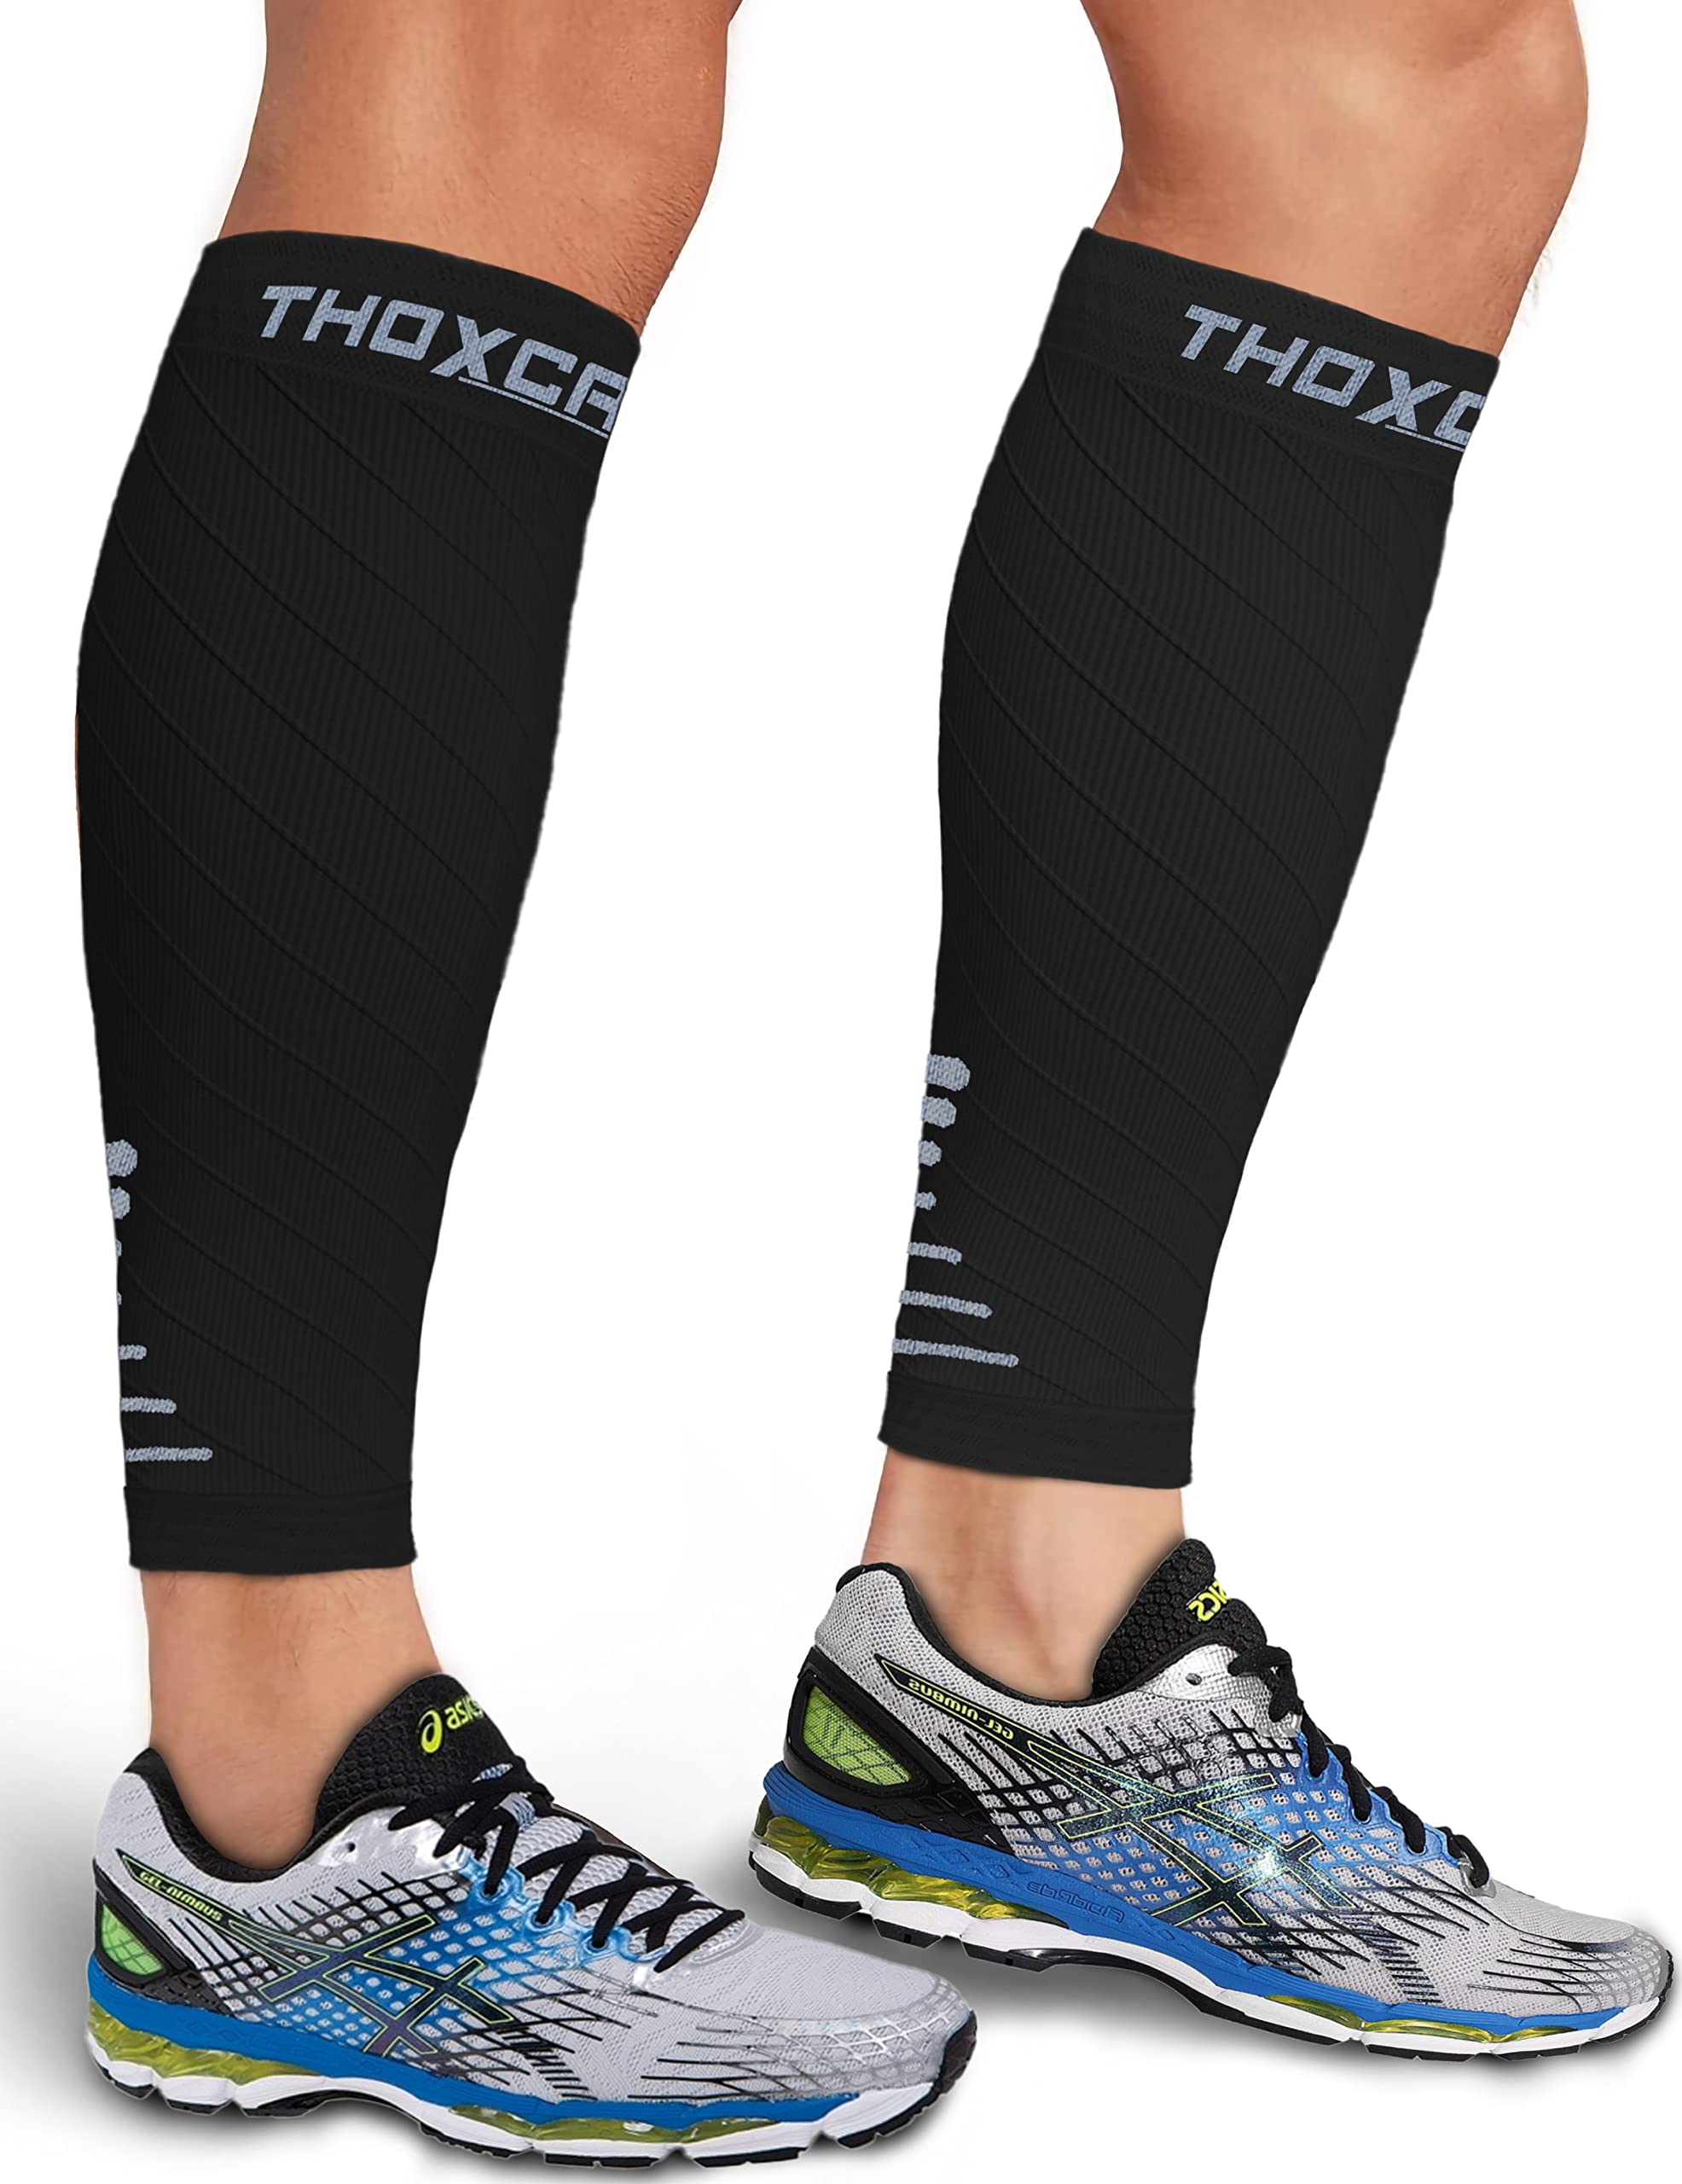 Thoxcare Calf Compression Sleeve for Men Women (1 Pair) Leg Support  Footless Compression Socks for Running 